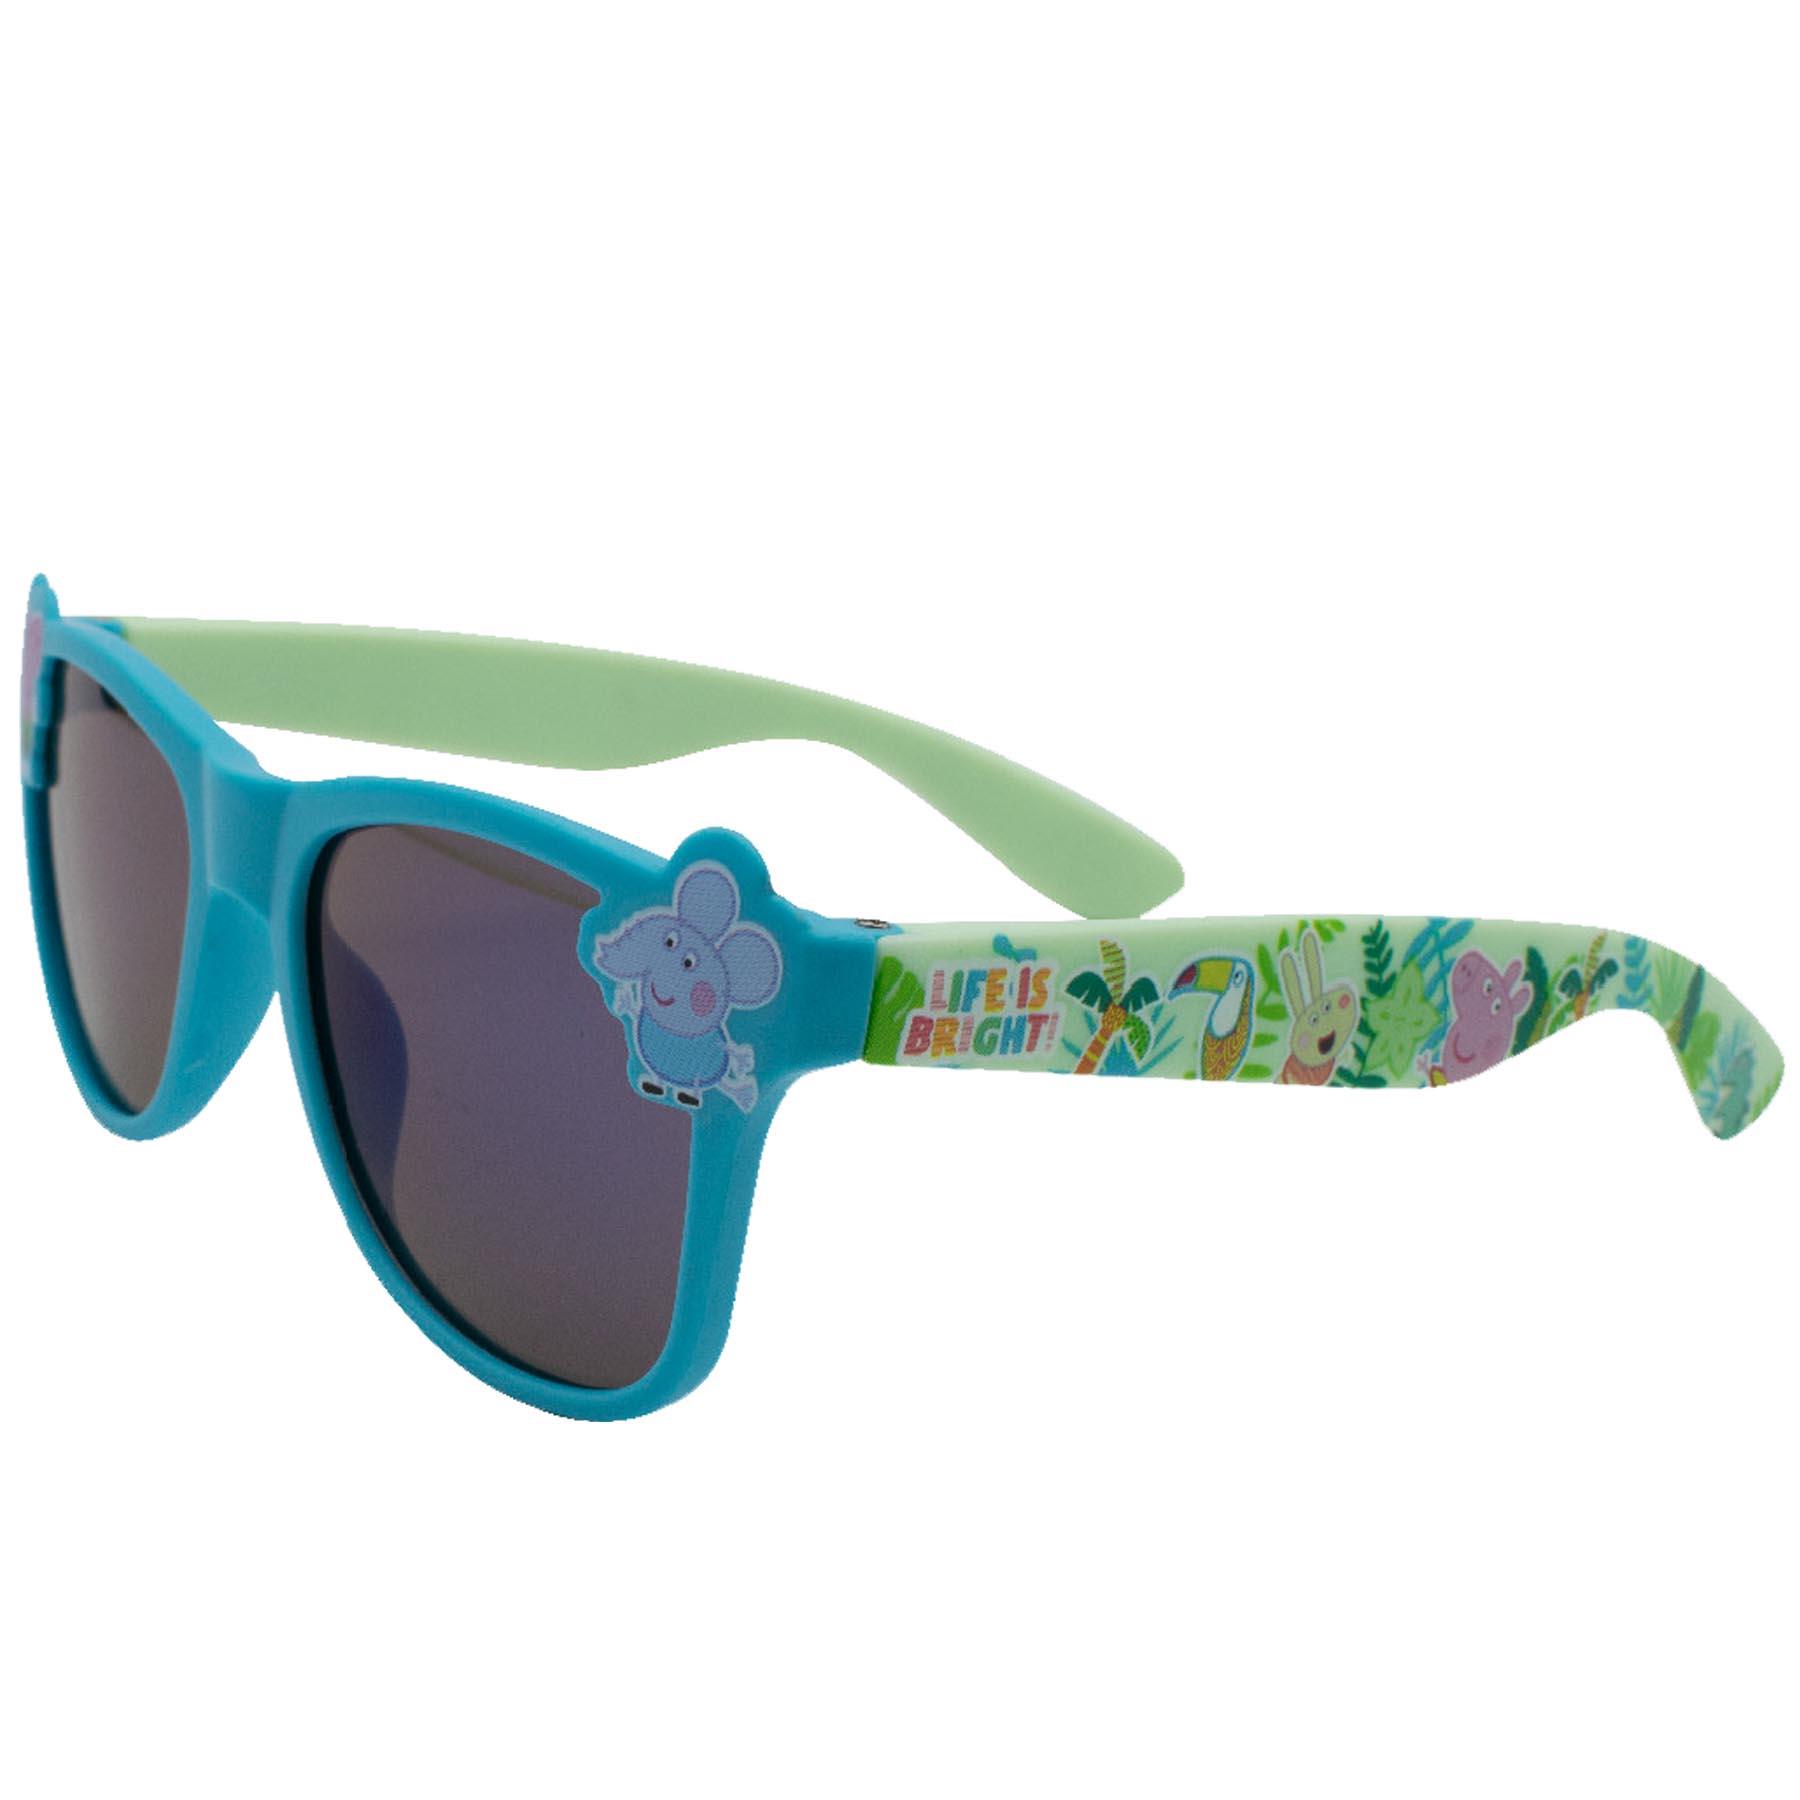 Peppa Pig Children's Character Sunglasses UV protection for Holiday - GEORGE12